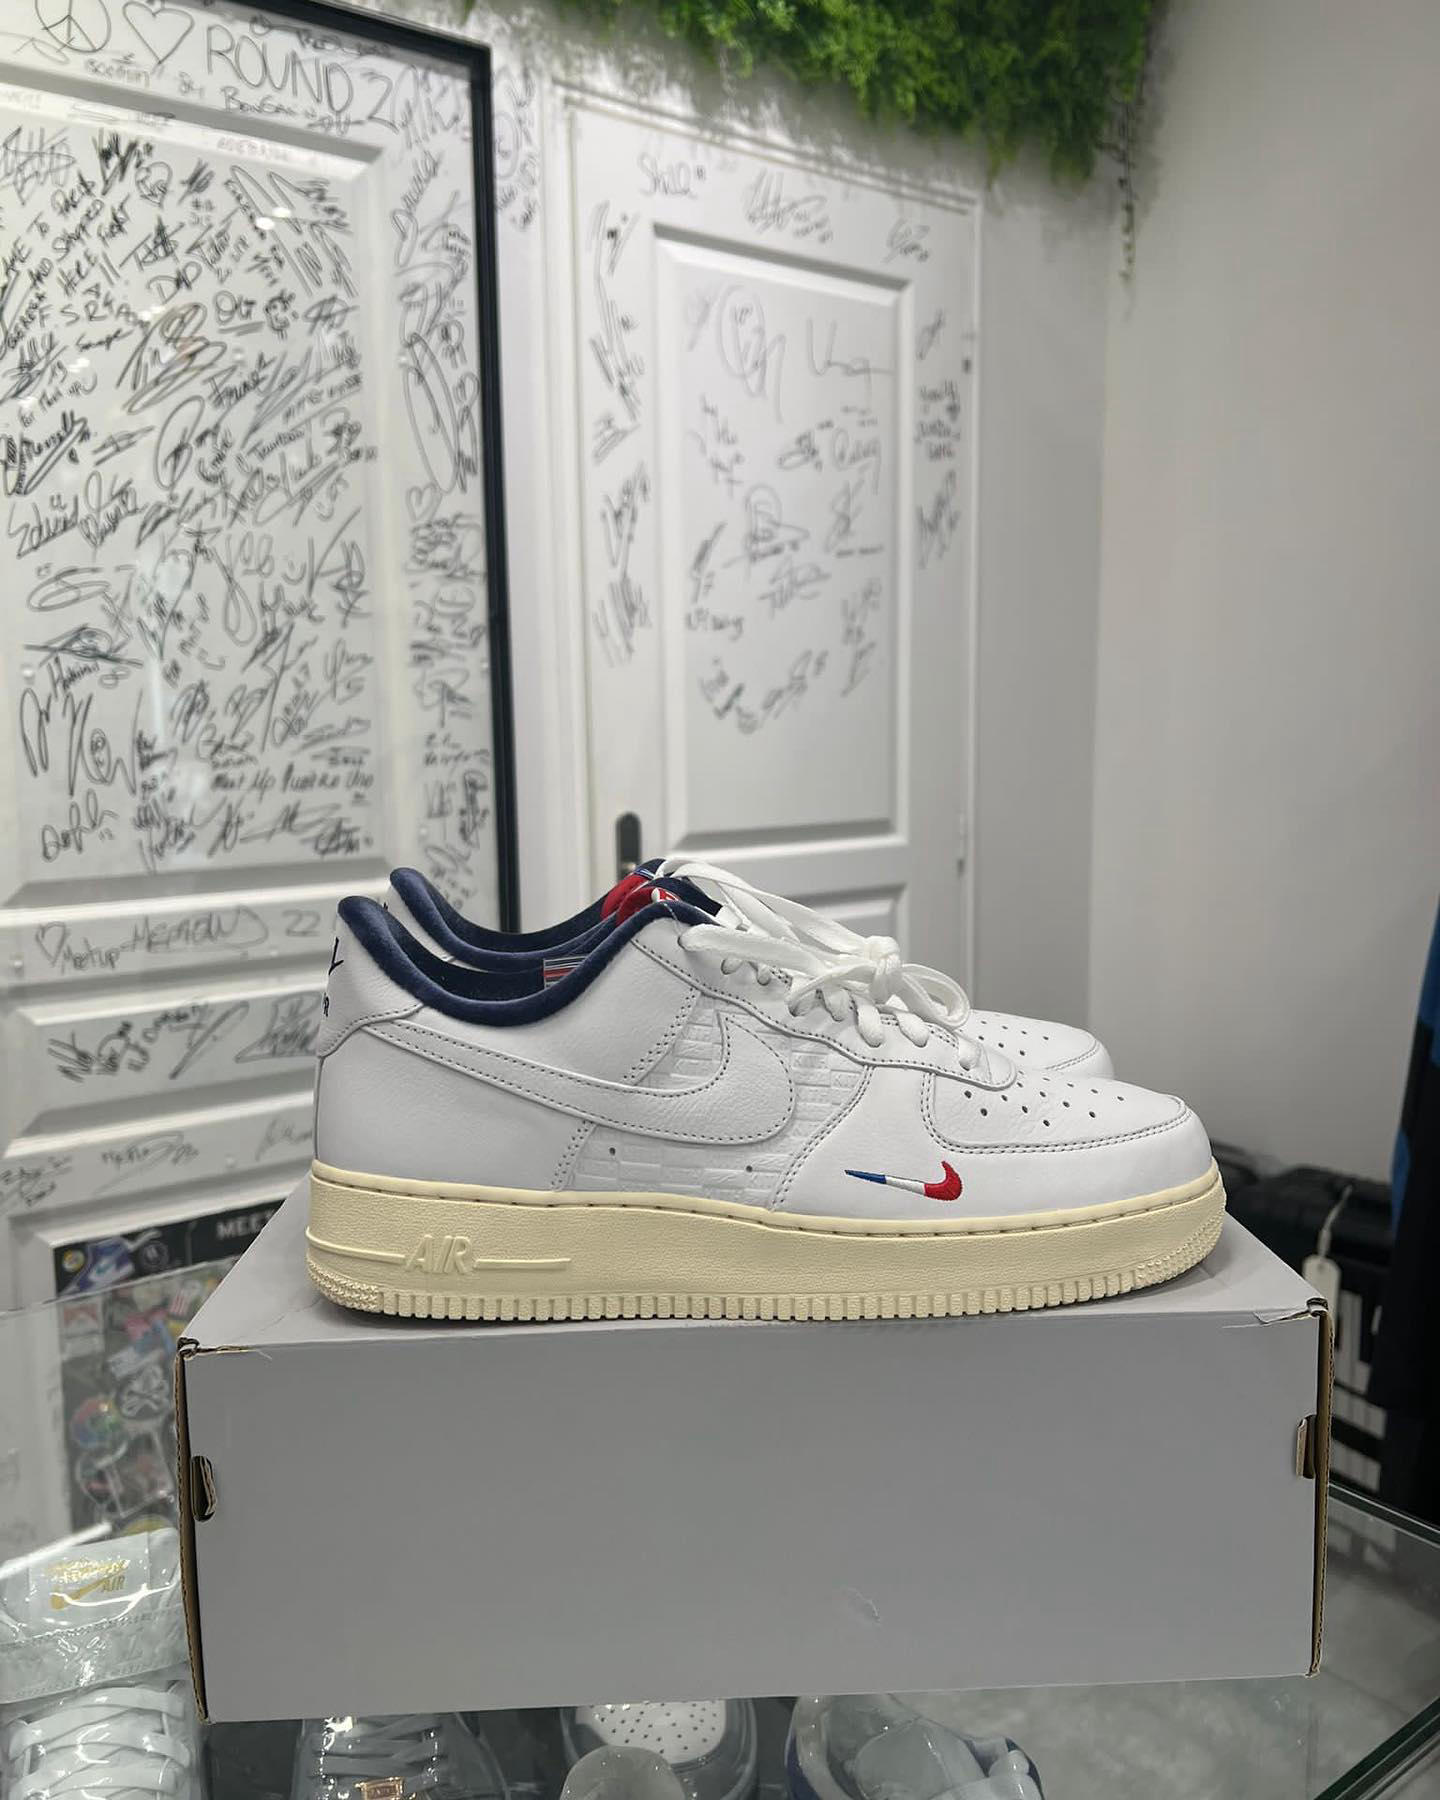 Nike Air Force 1 Kith Paris size 10 us available in store